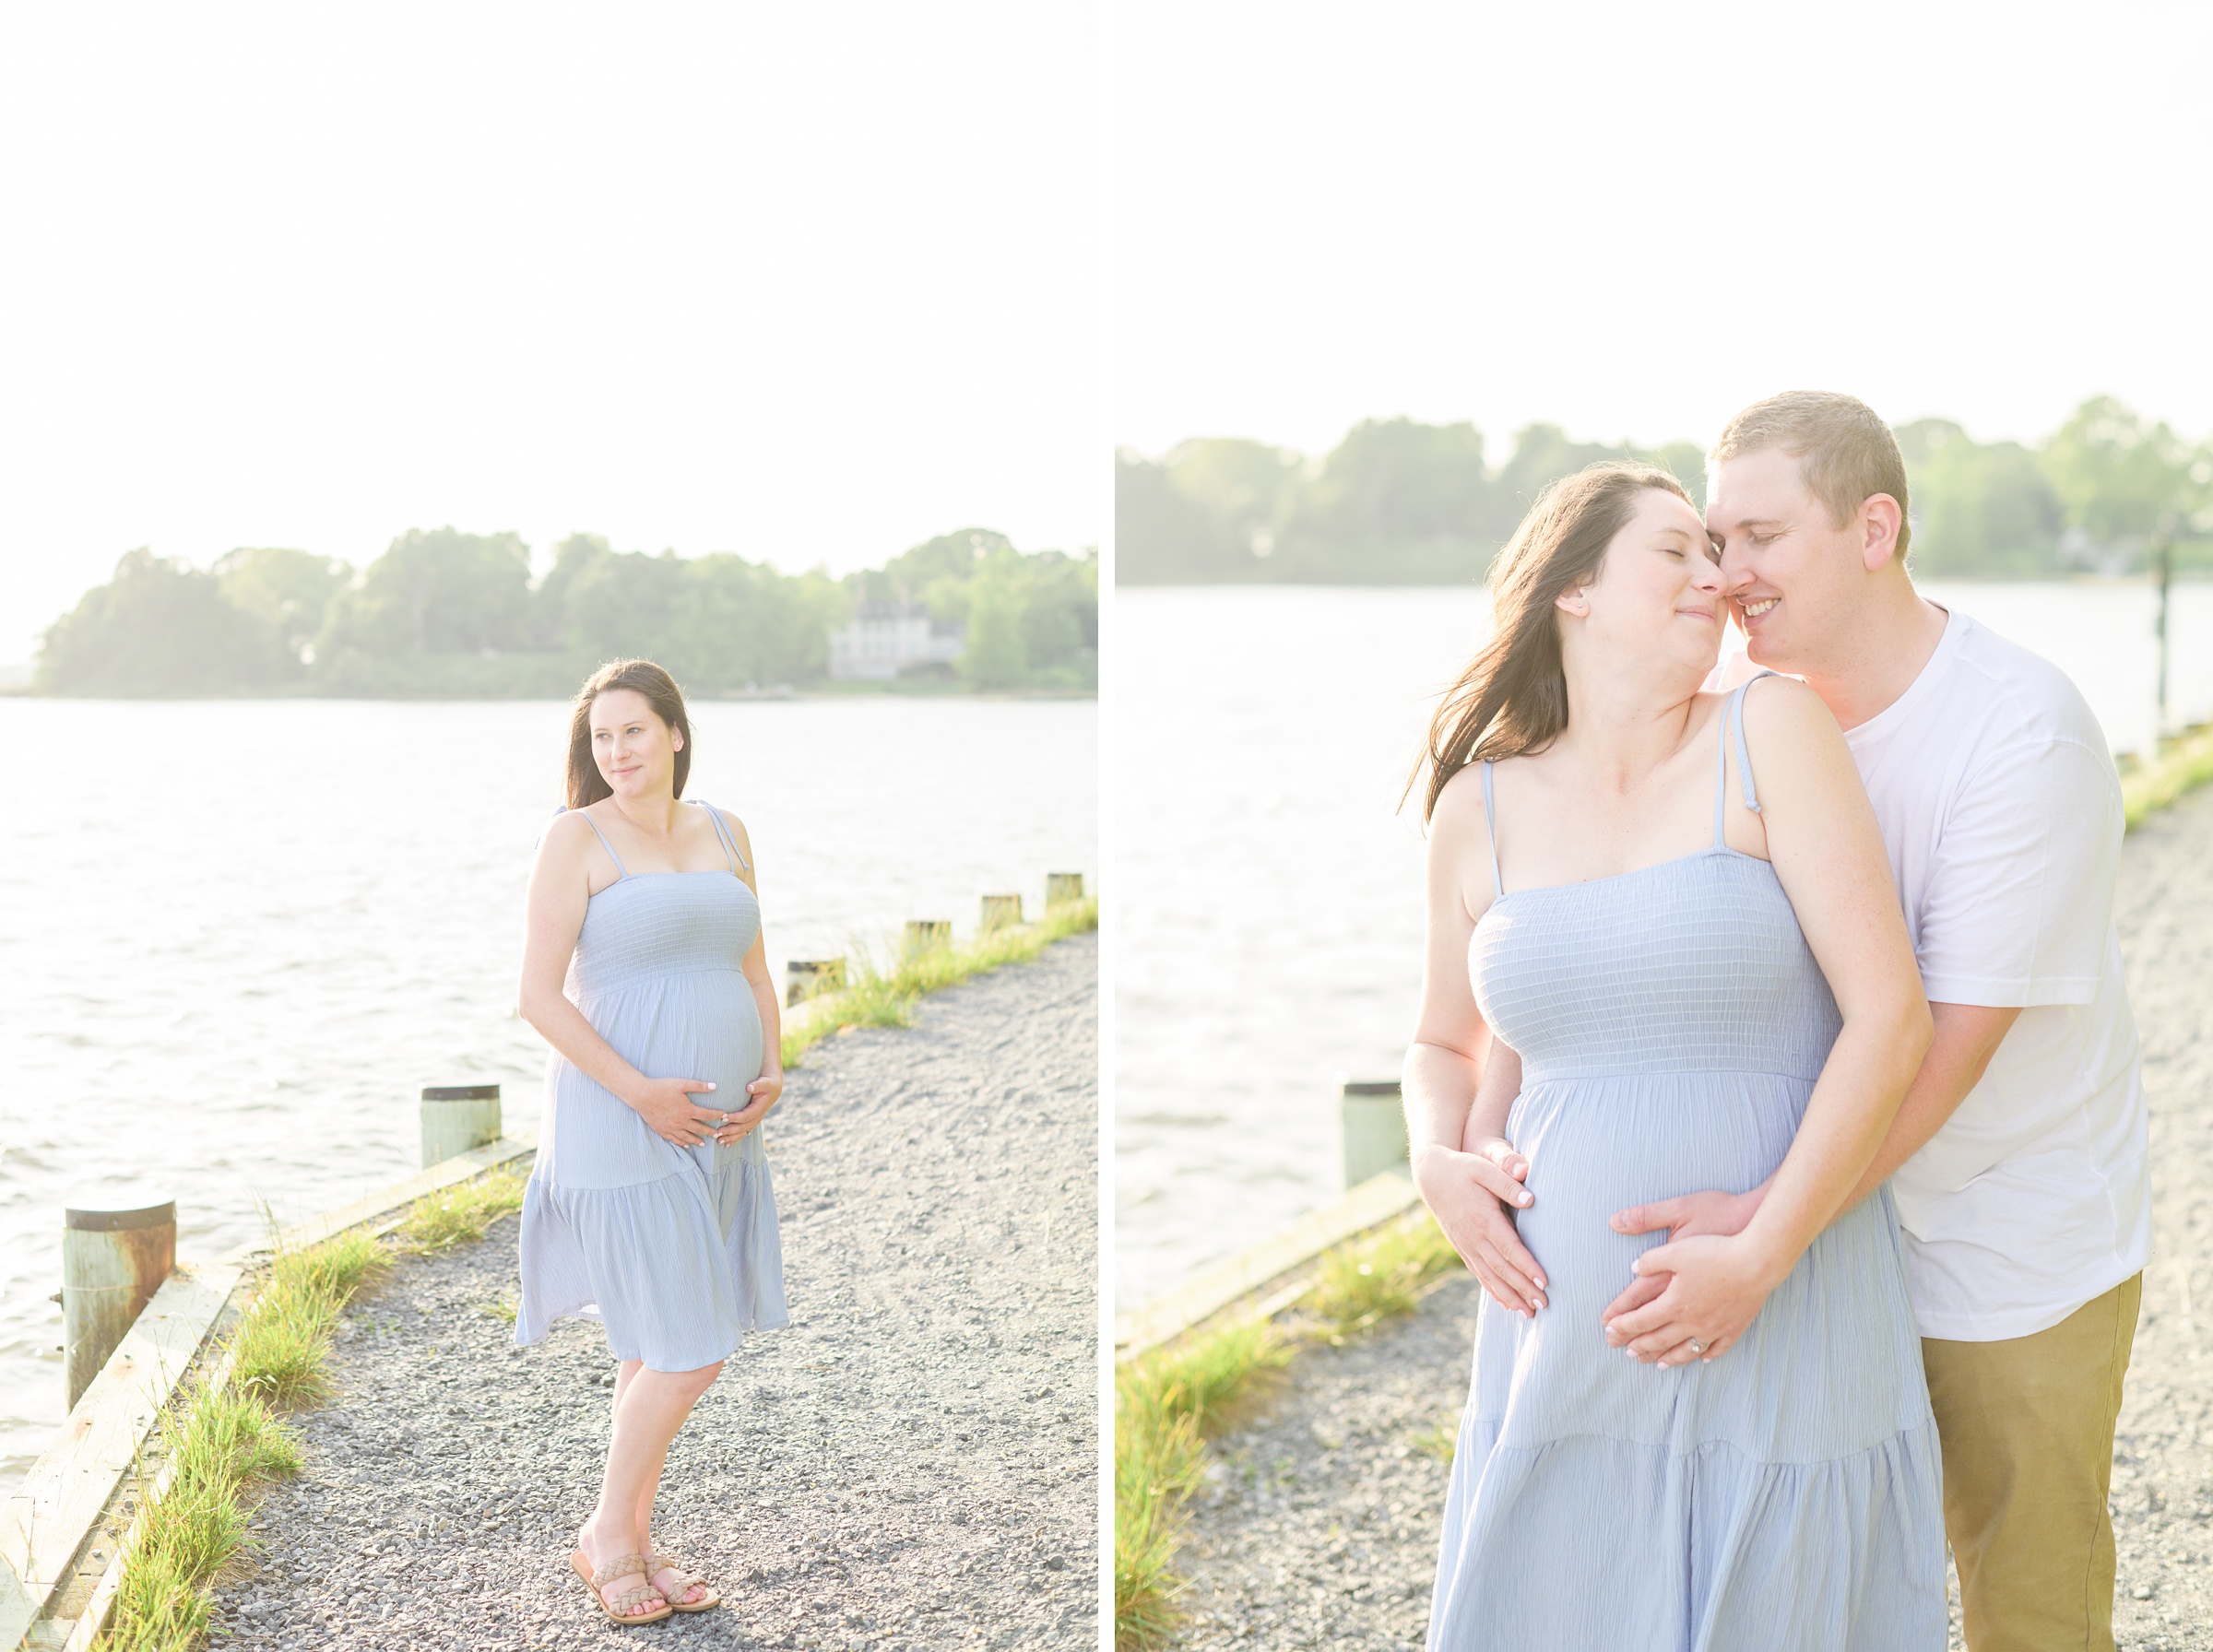 Waterfront maternity portrait session photographed by Baltimore Maternity and Newborn Photographer Cait Kramer.